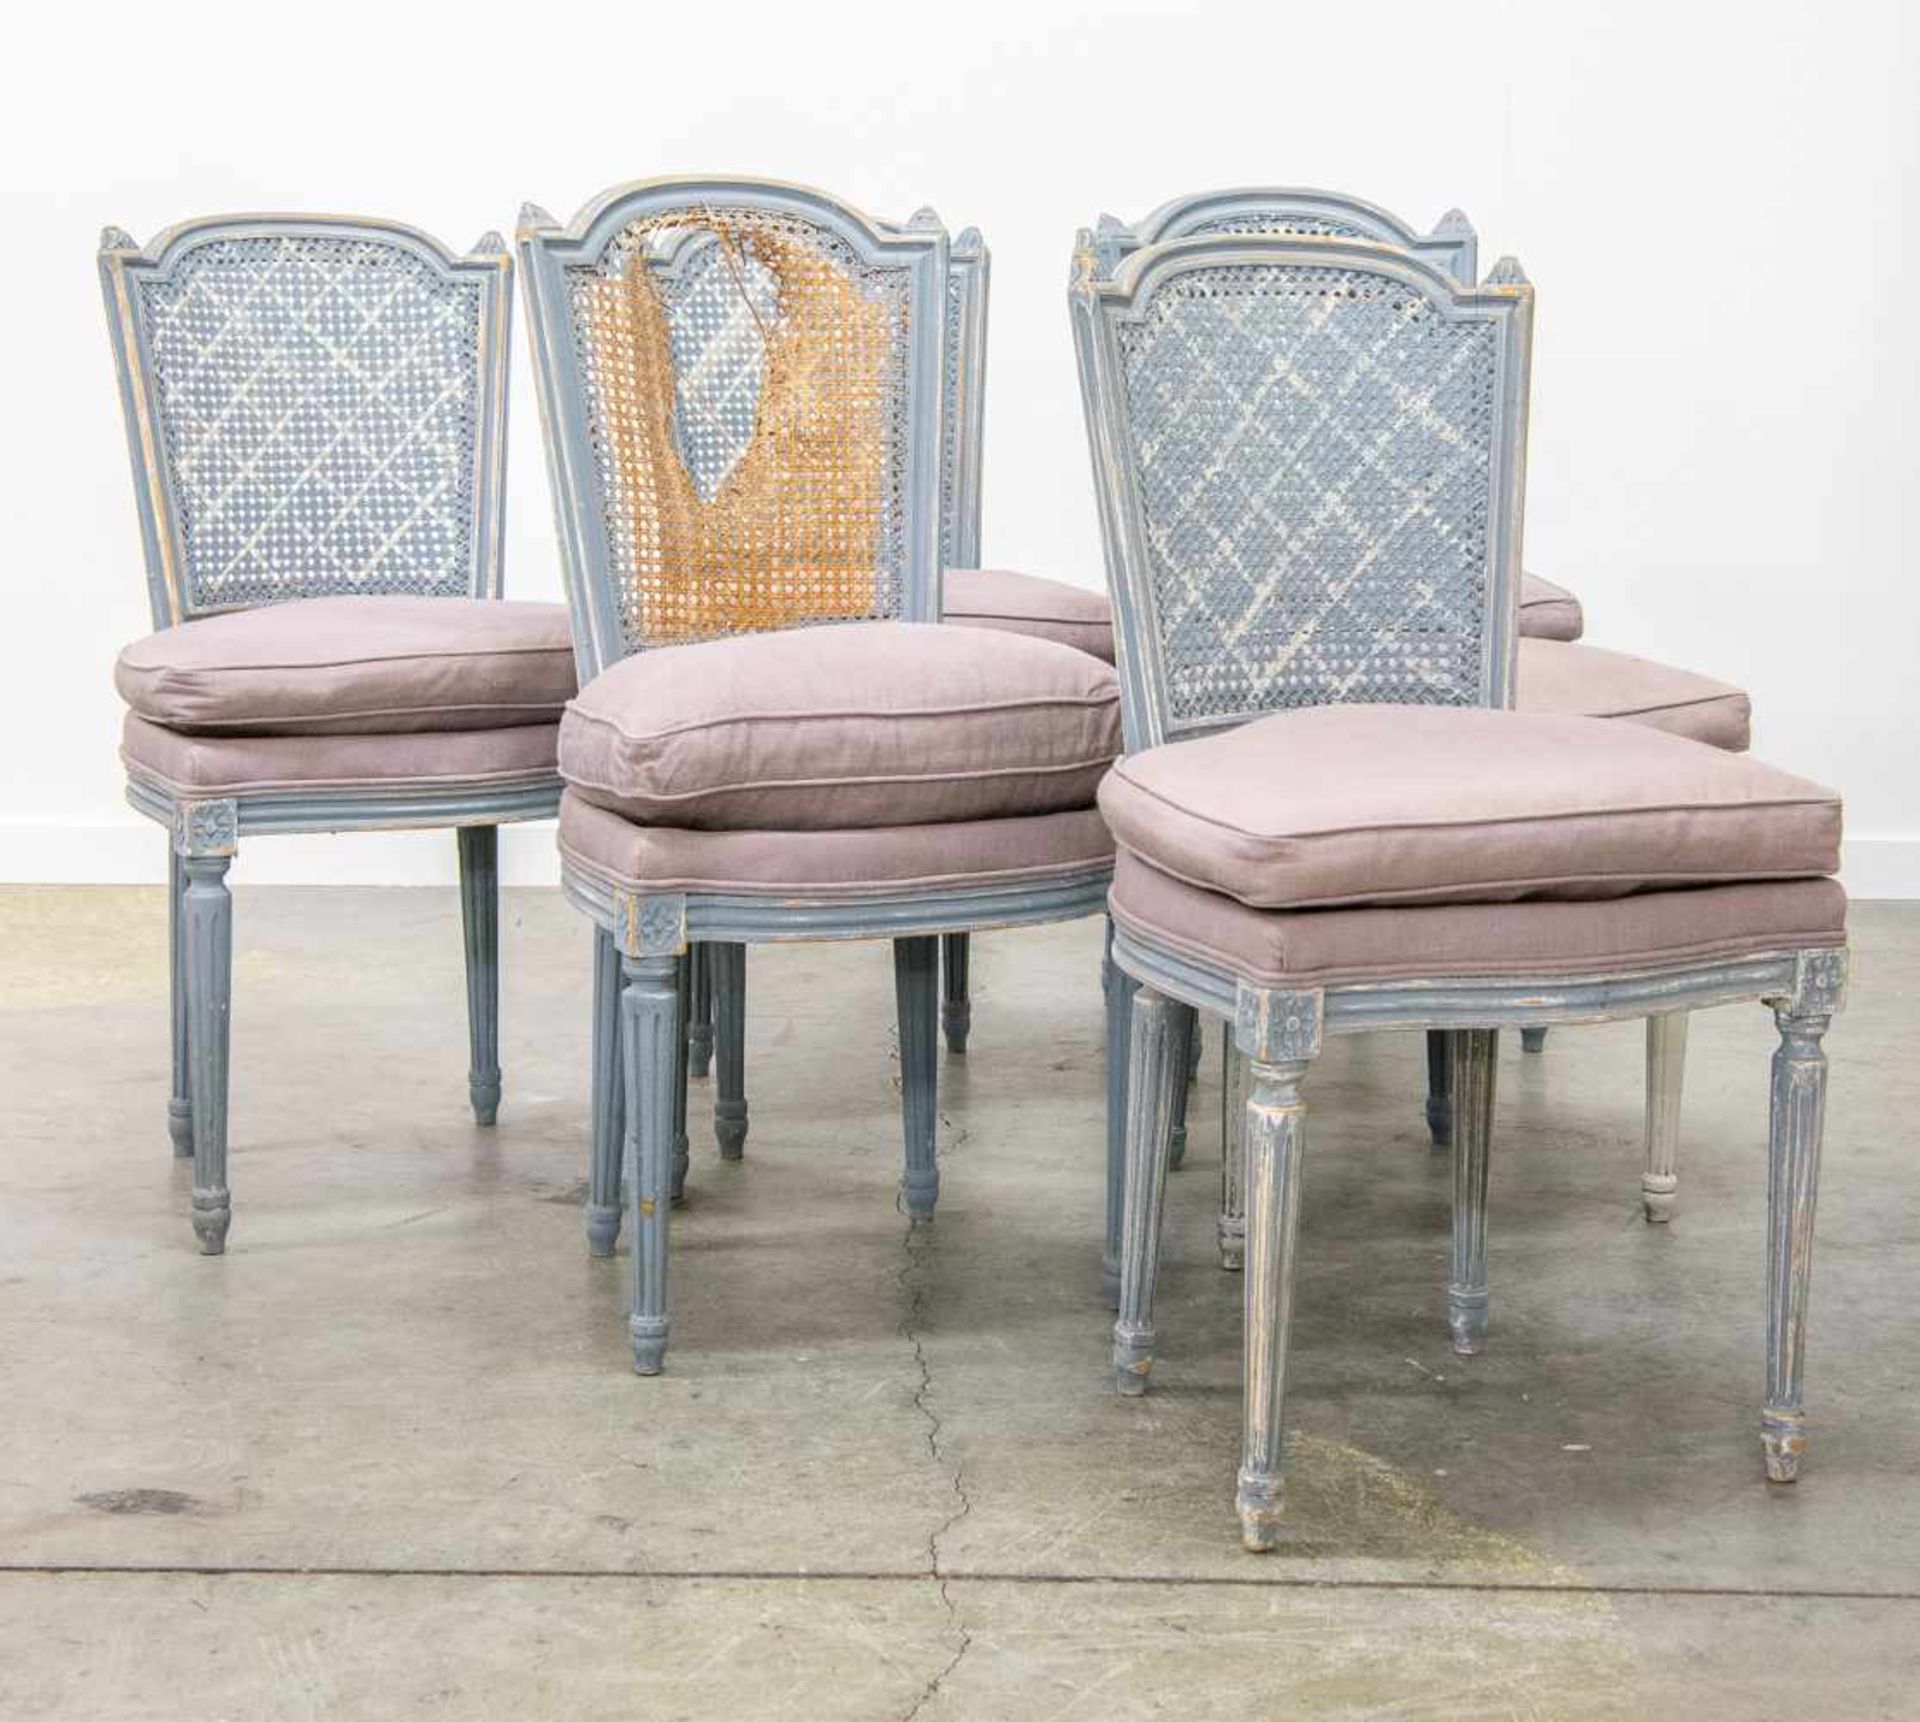 Set of 6 chairs in Louis XVI style, patinated blue and finished with a cushion. (1 to restore)